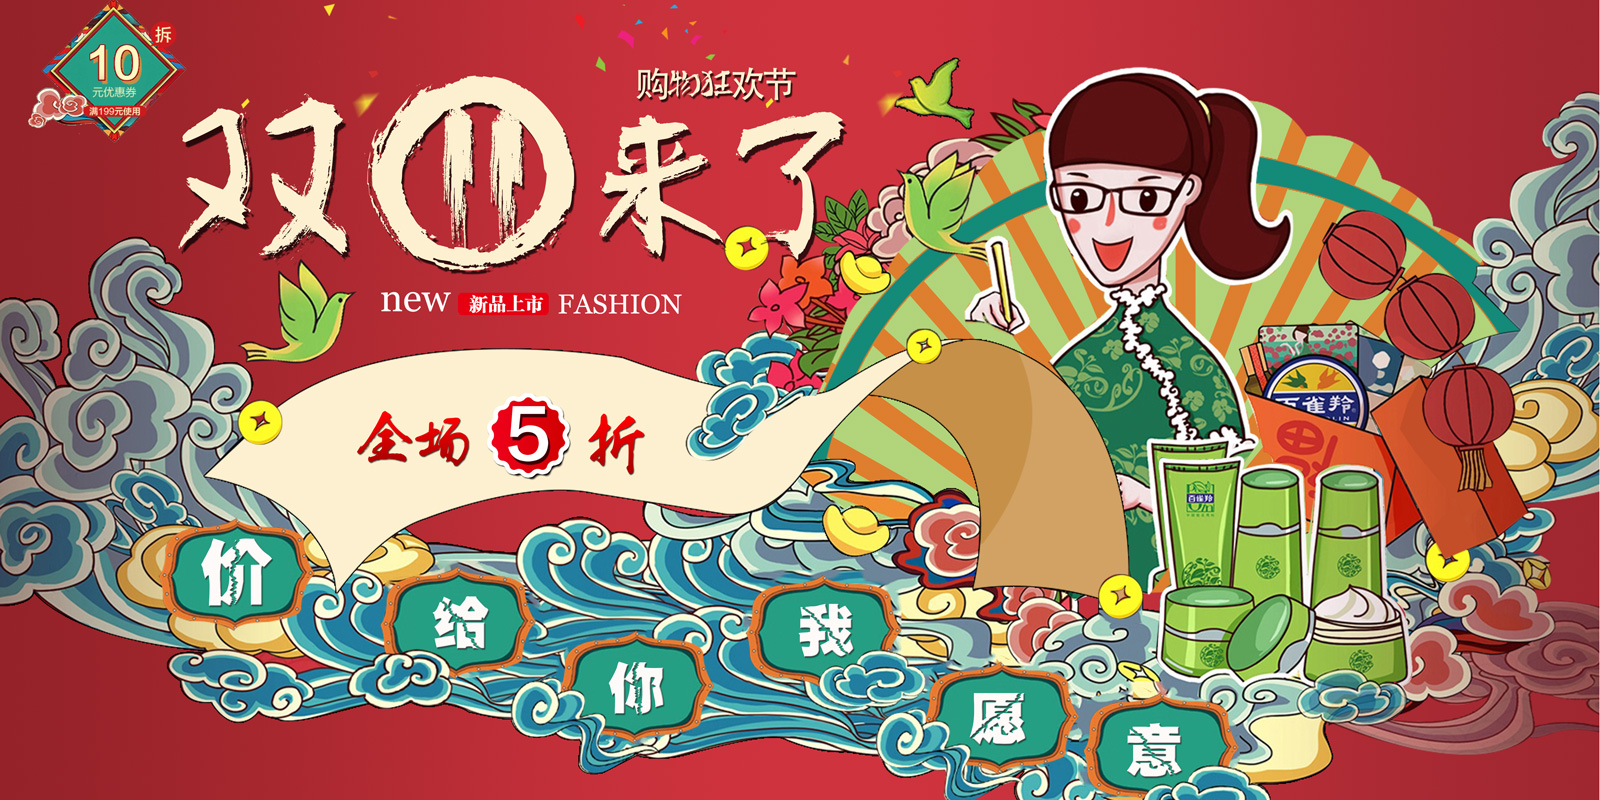 China Shopping Carnival online advertising design - China PSD File Free Download